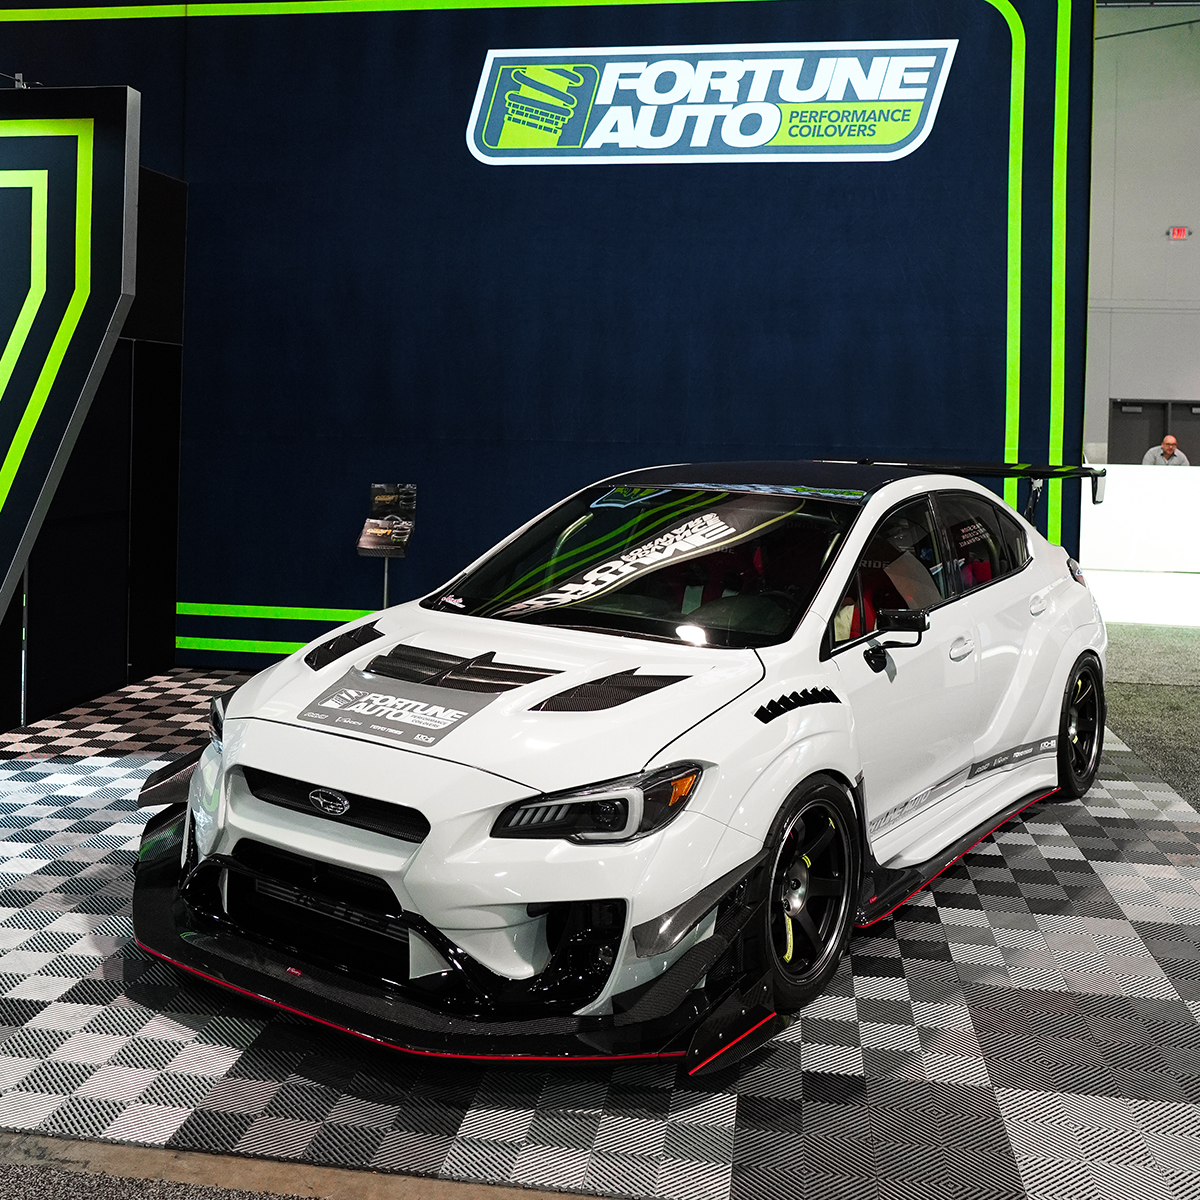 Subaru show car featured in the Fortune Auto booth at SEMA 2023